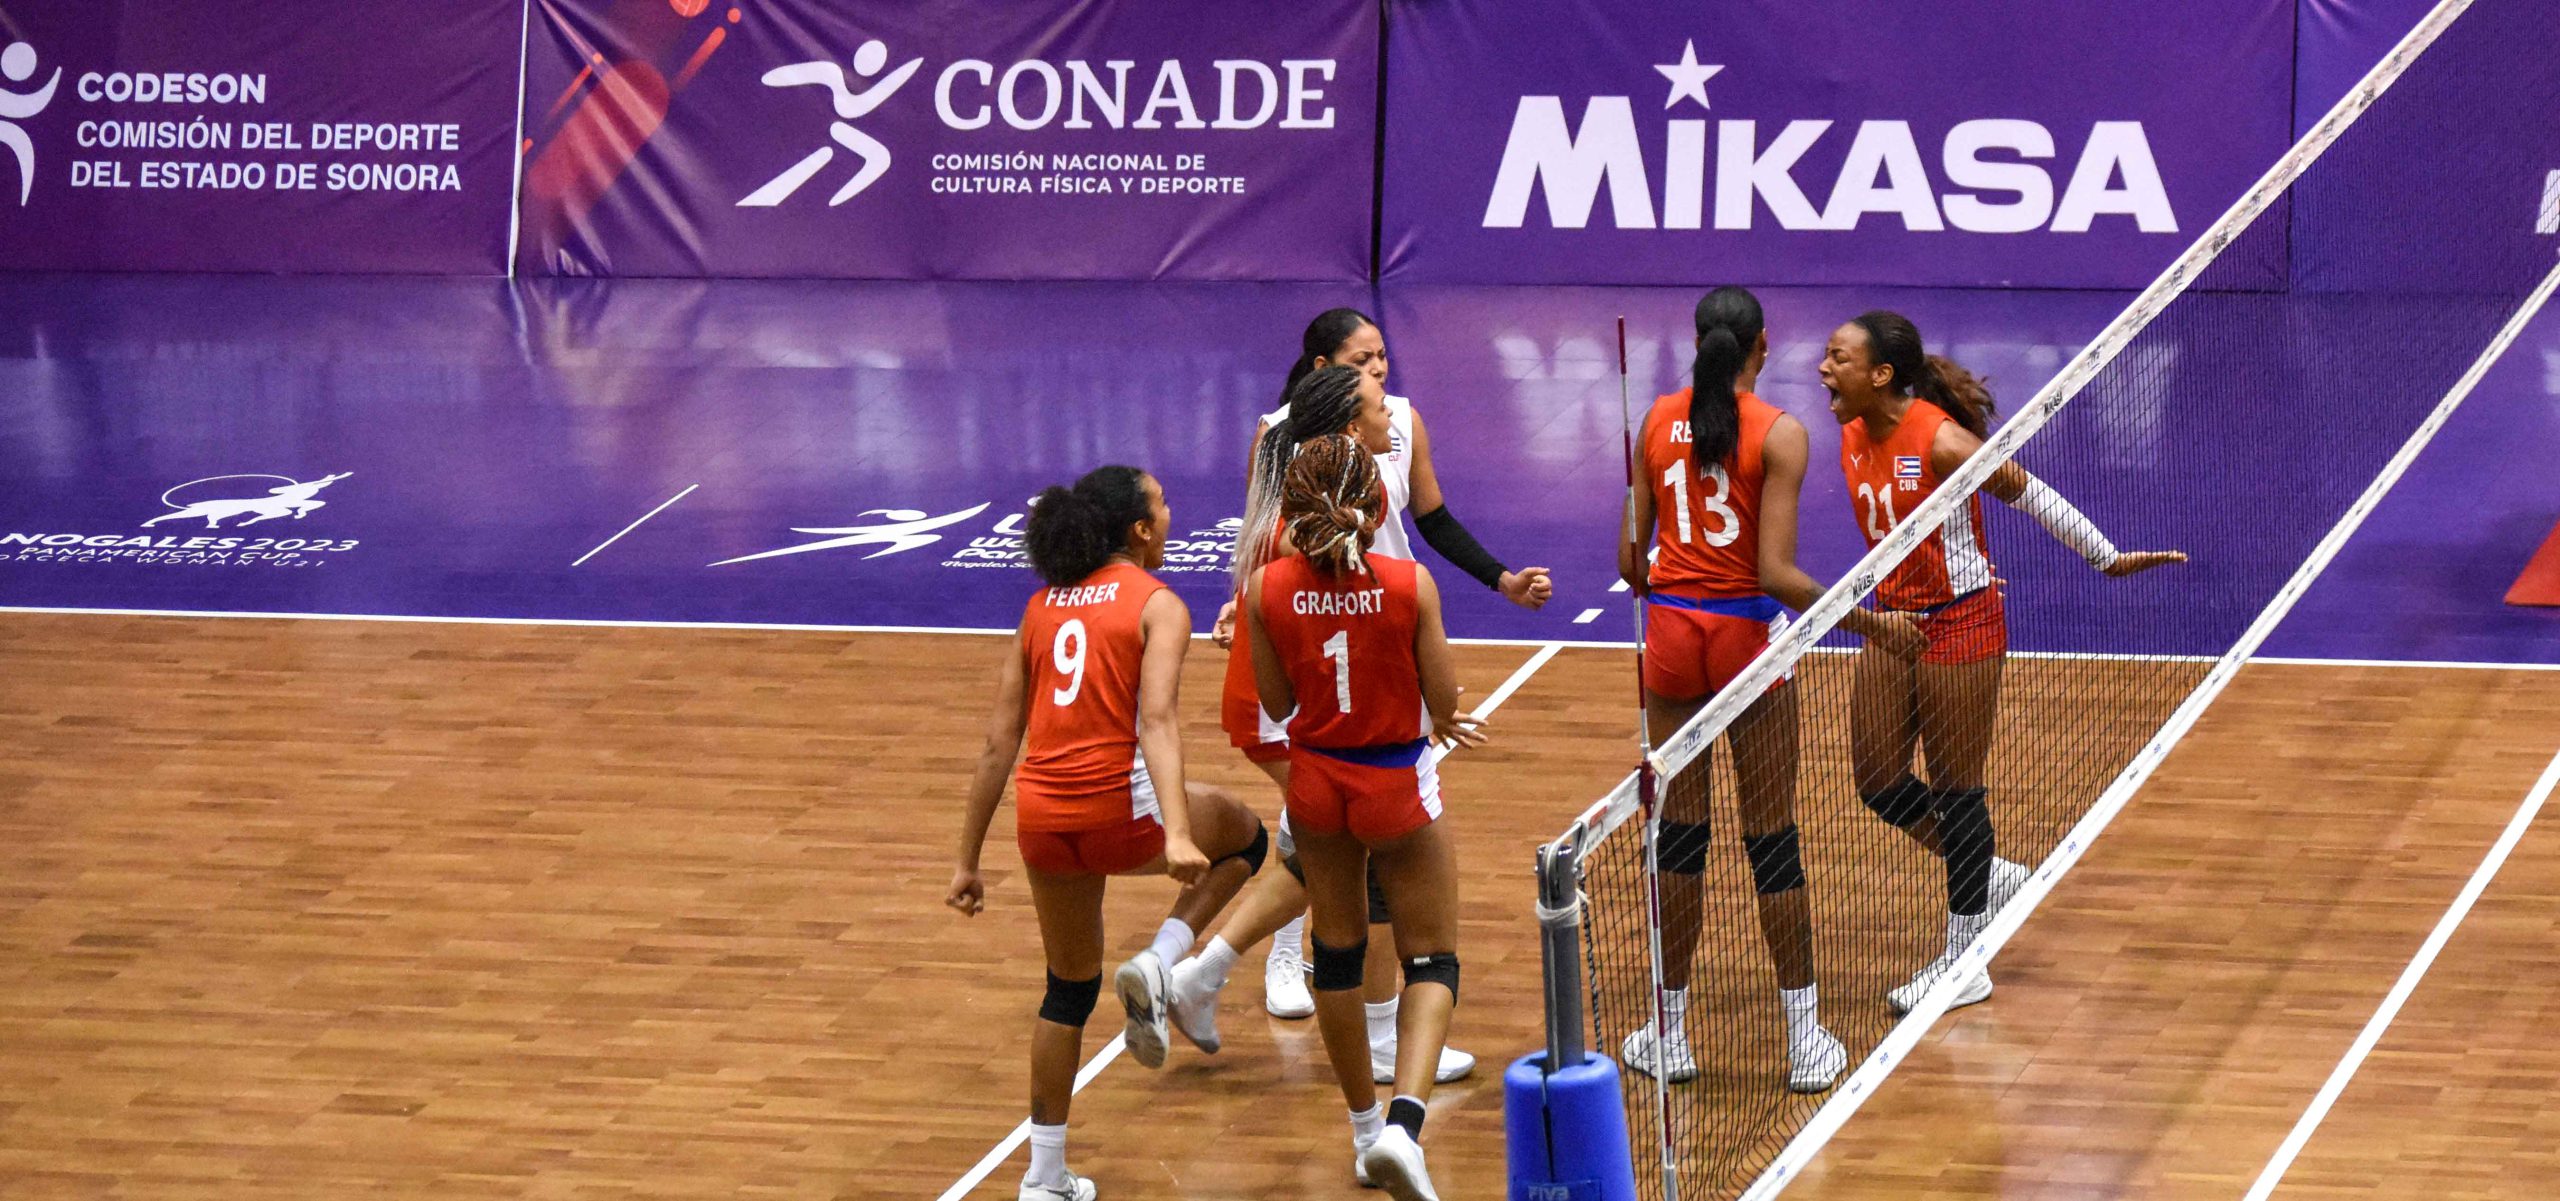 Cuba makes into semifinals with dramatic quarterfinal win over Costa Rica 